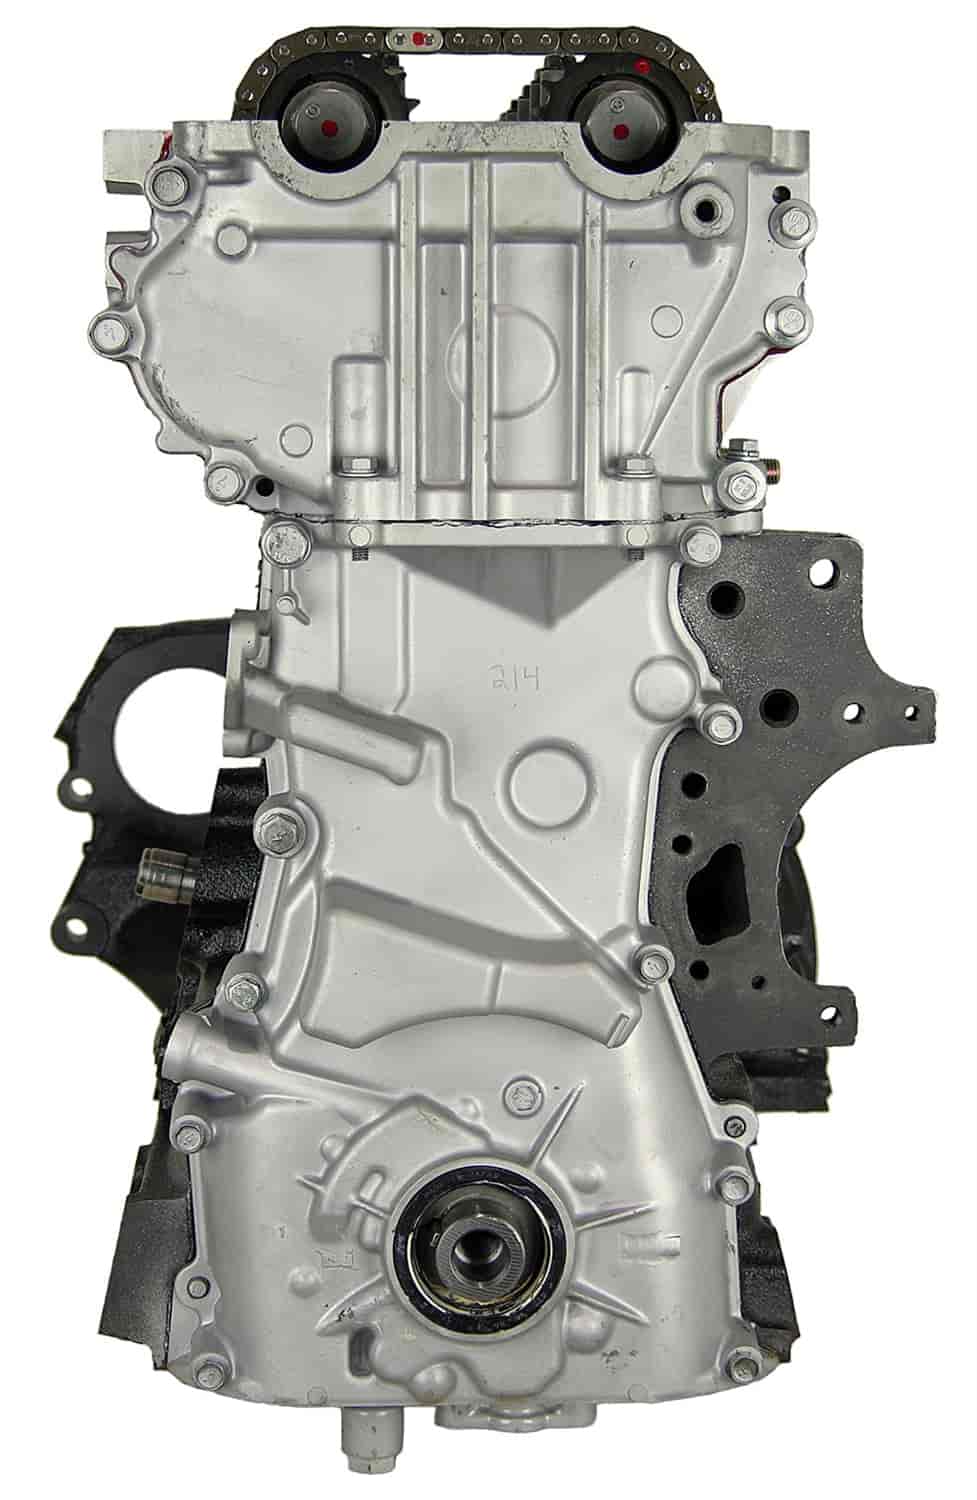 Remanufactured Crate Engine for 1999-20001 Nissan Altima with